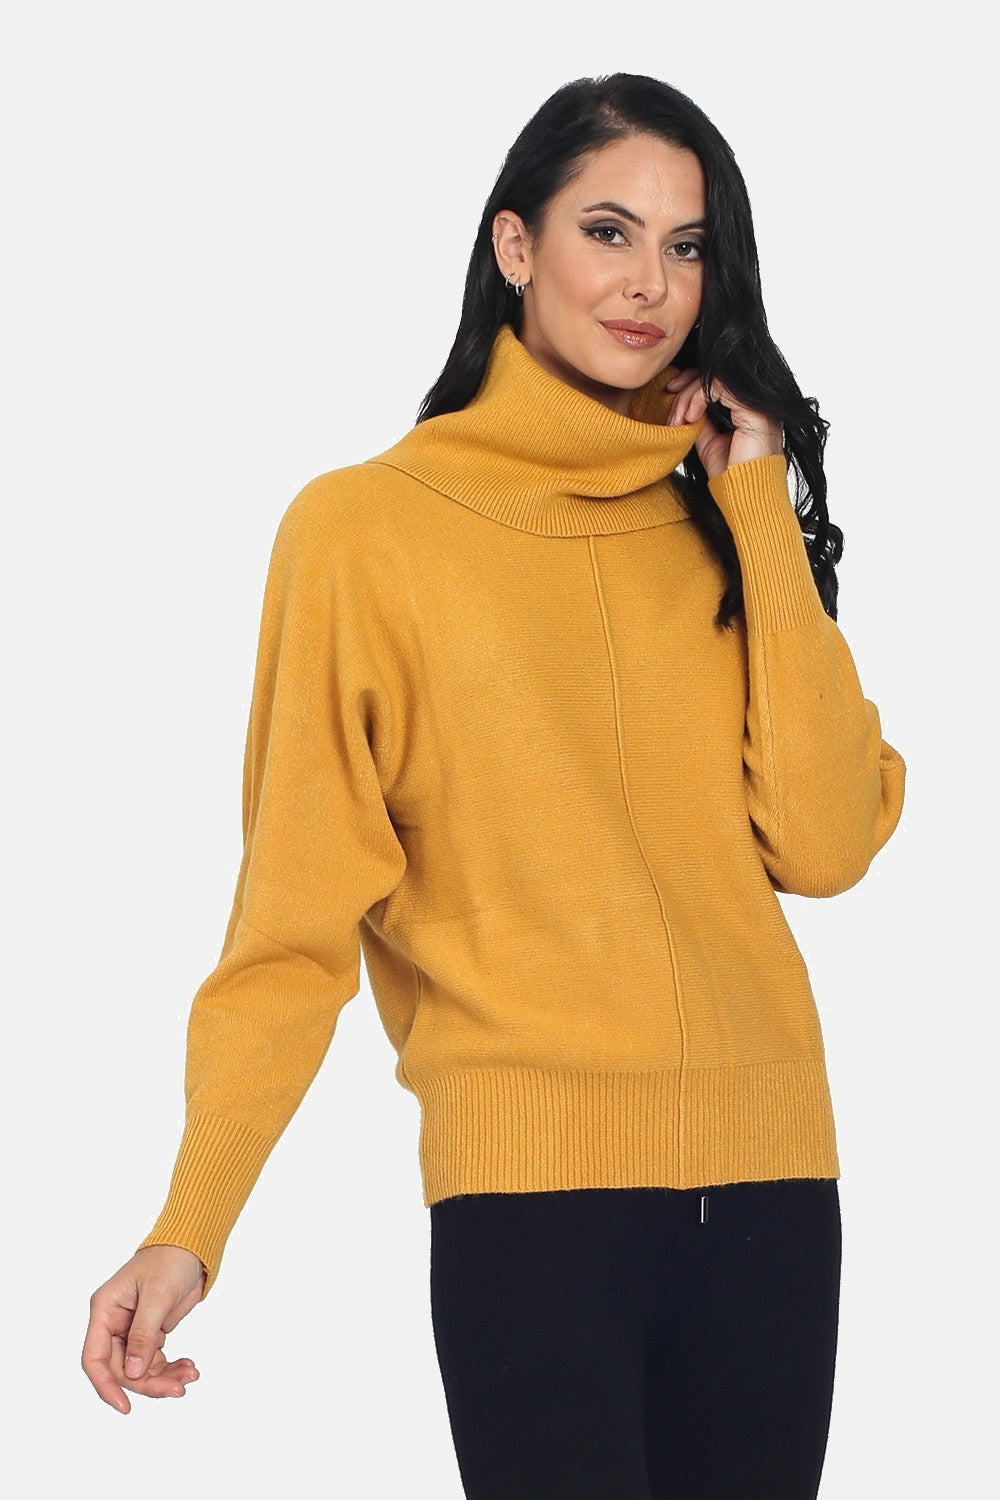 Ball Collar Sweater, Batwing Sleeves in 4 threads